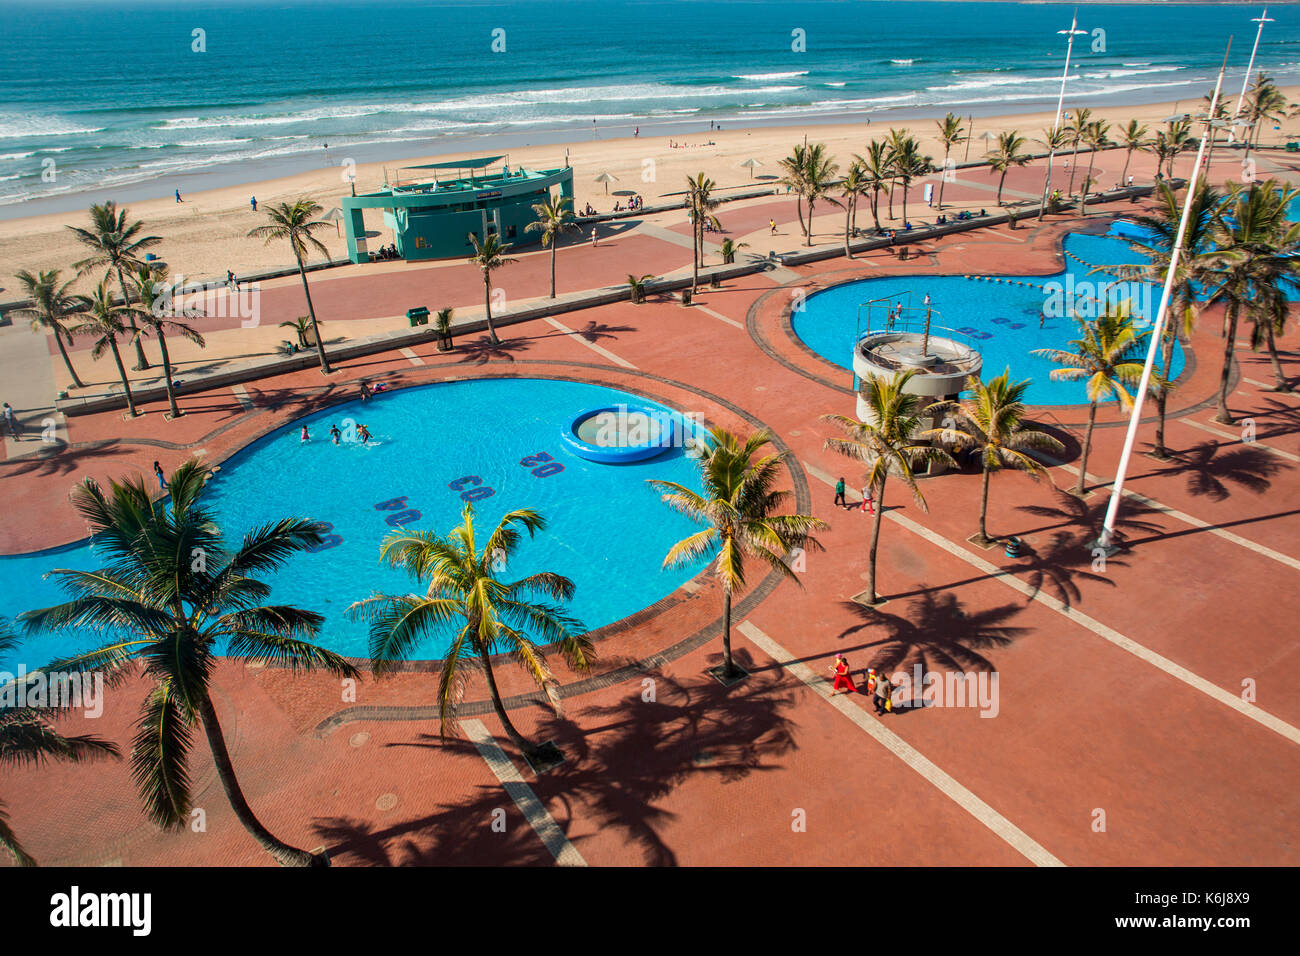 Aerial view of children playing in public pools near promenade of Golden Mile on Durban, South Africa Stock Photo